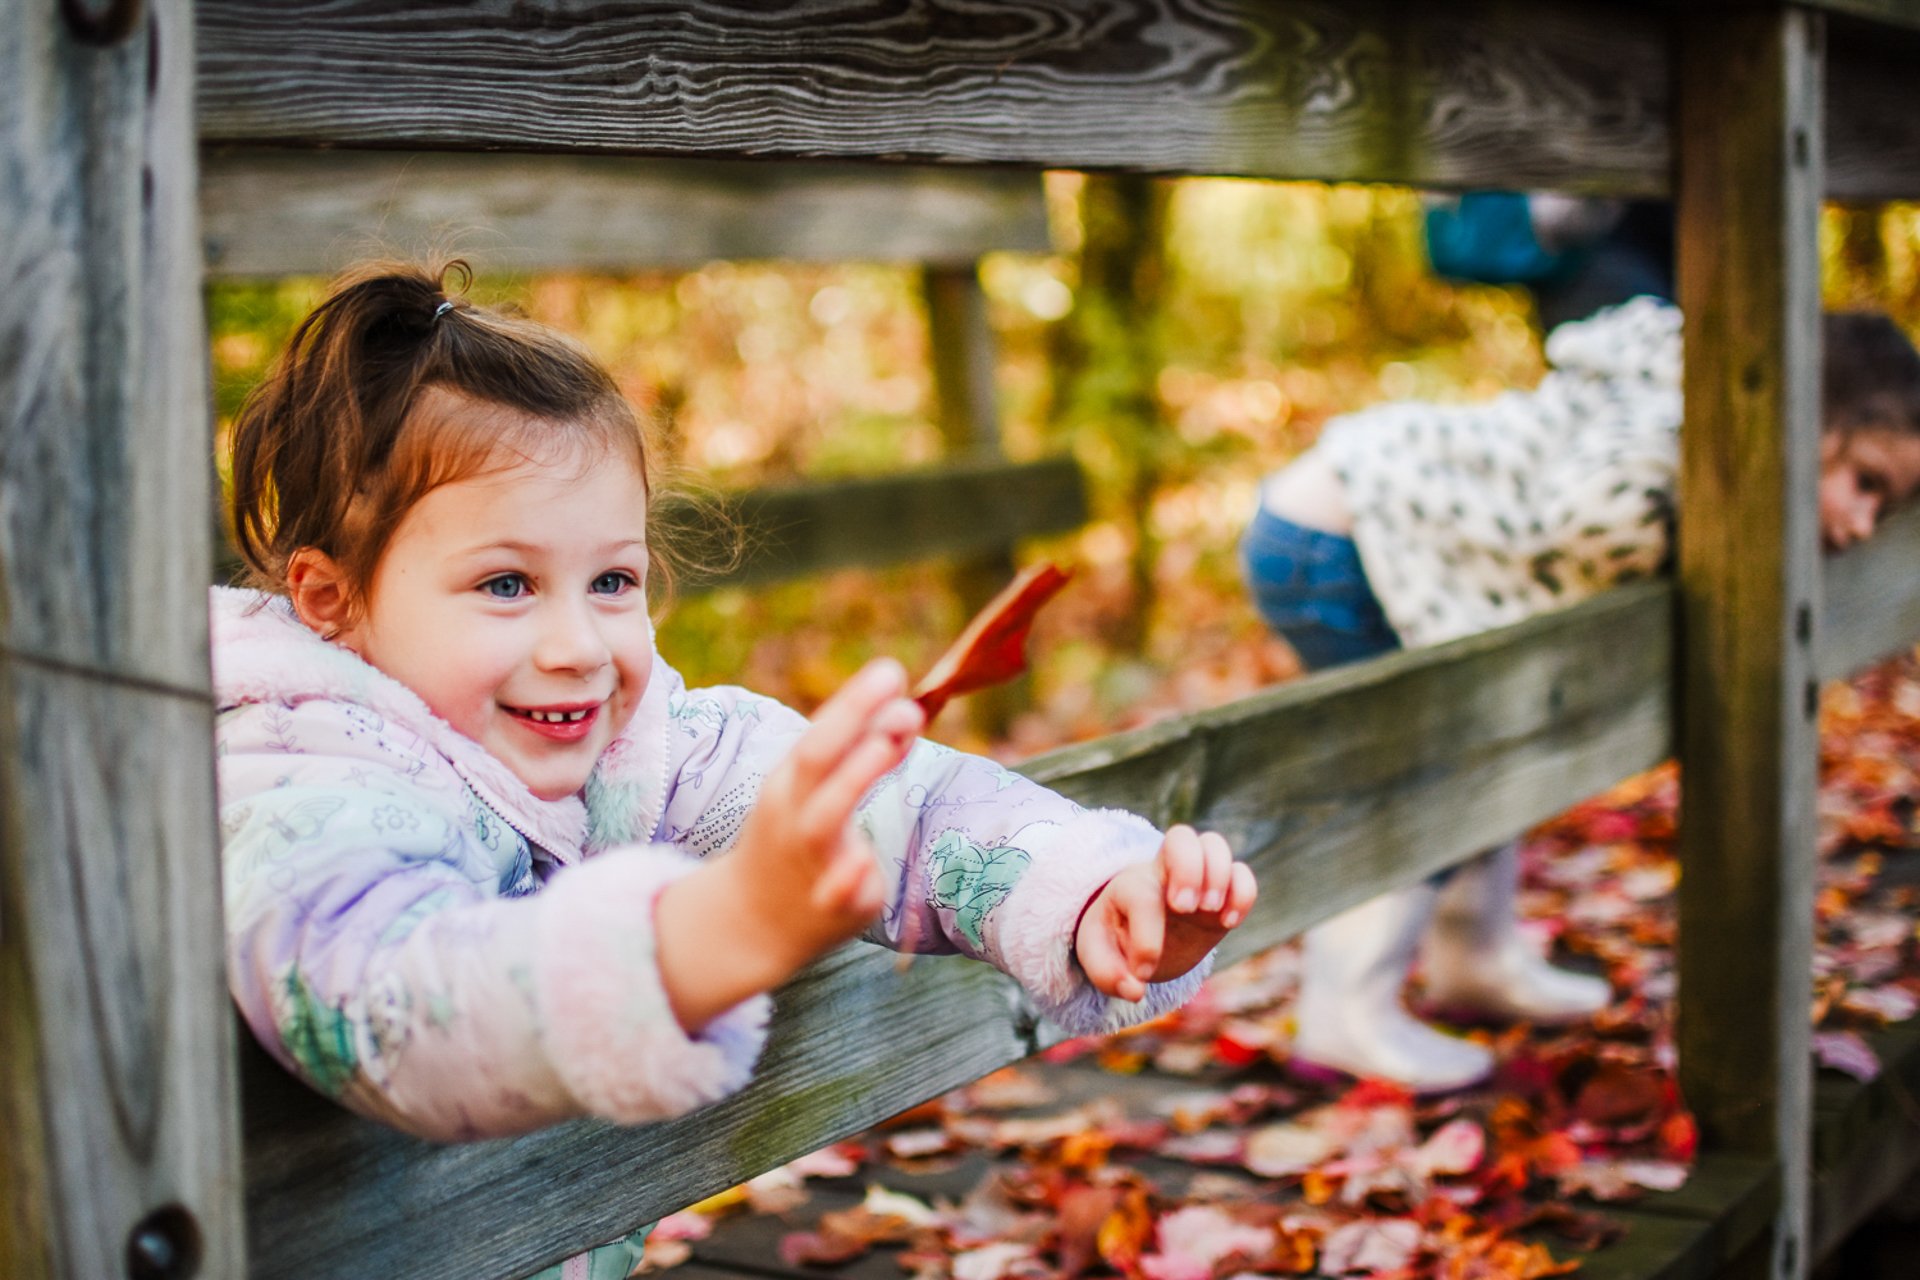 A preschool-age child leans between the rails of a wooden fence, smiling and reaching for a falling leaf. Colorful leaves on the ground suggest it is autumn.